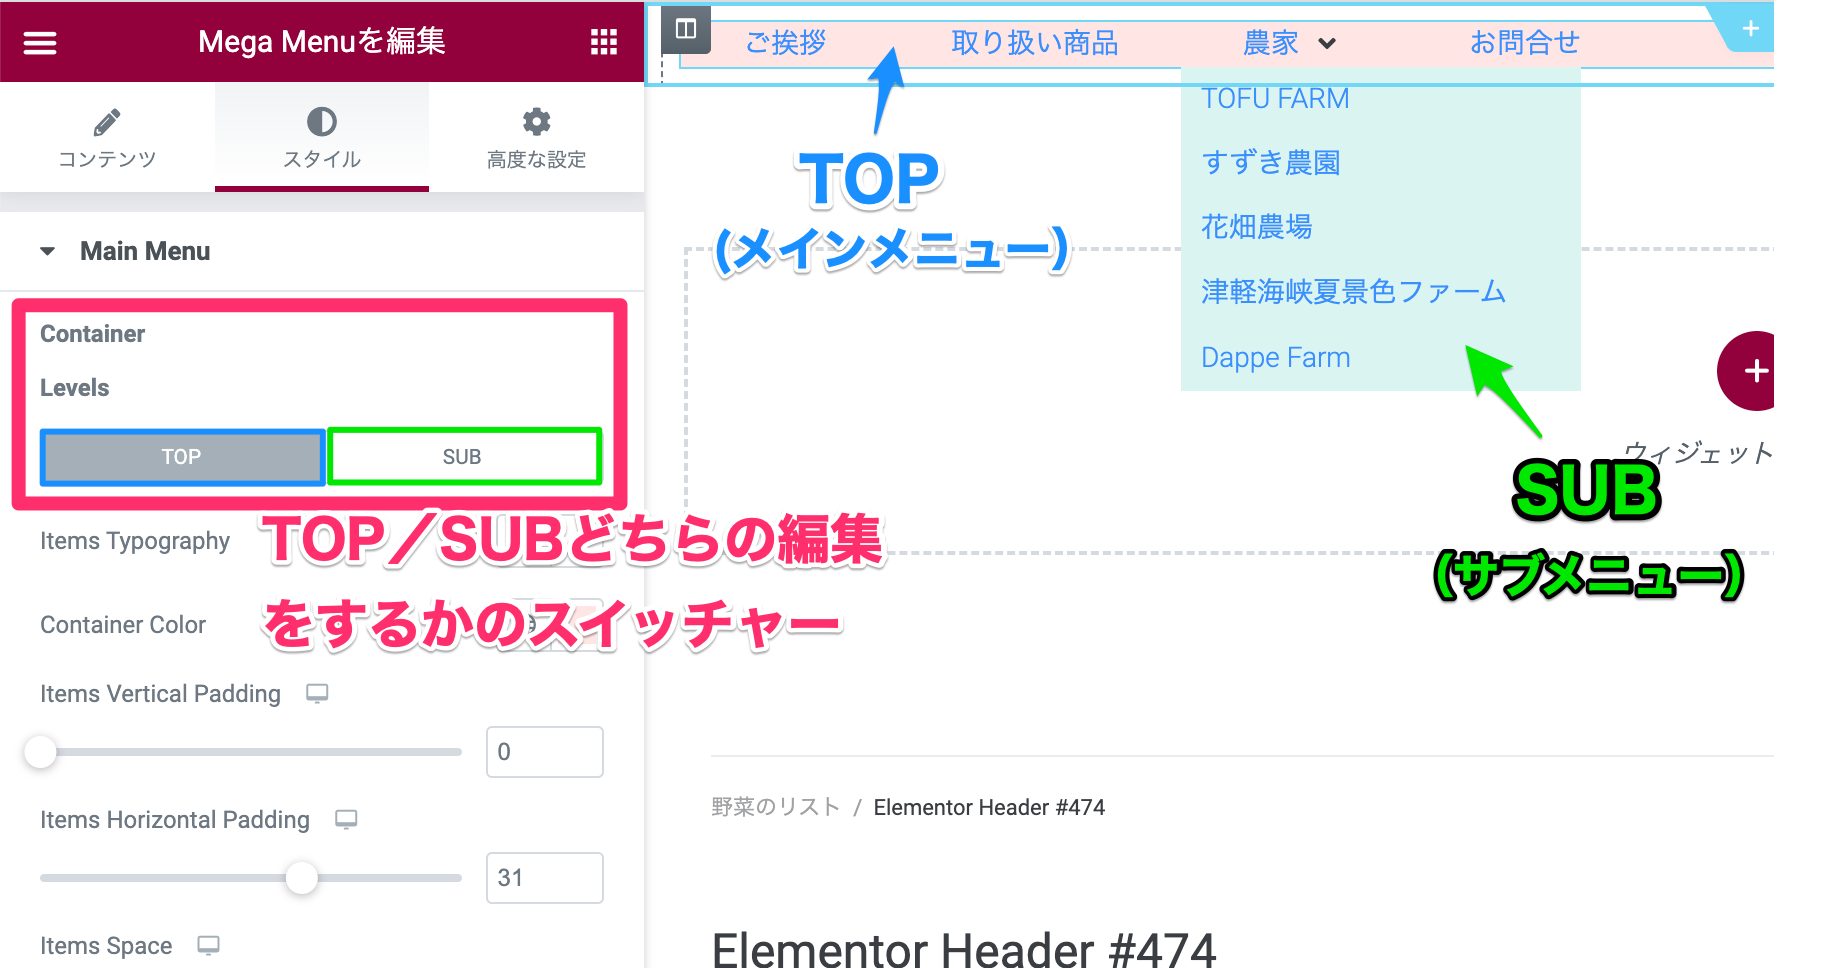 Container/LevelsのTOPとSUBの説明